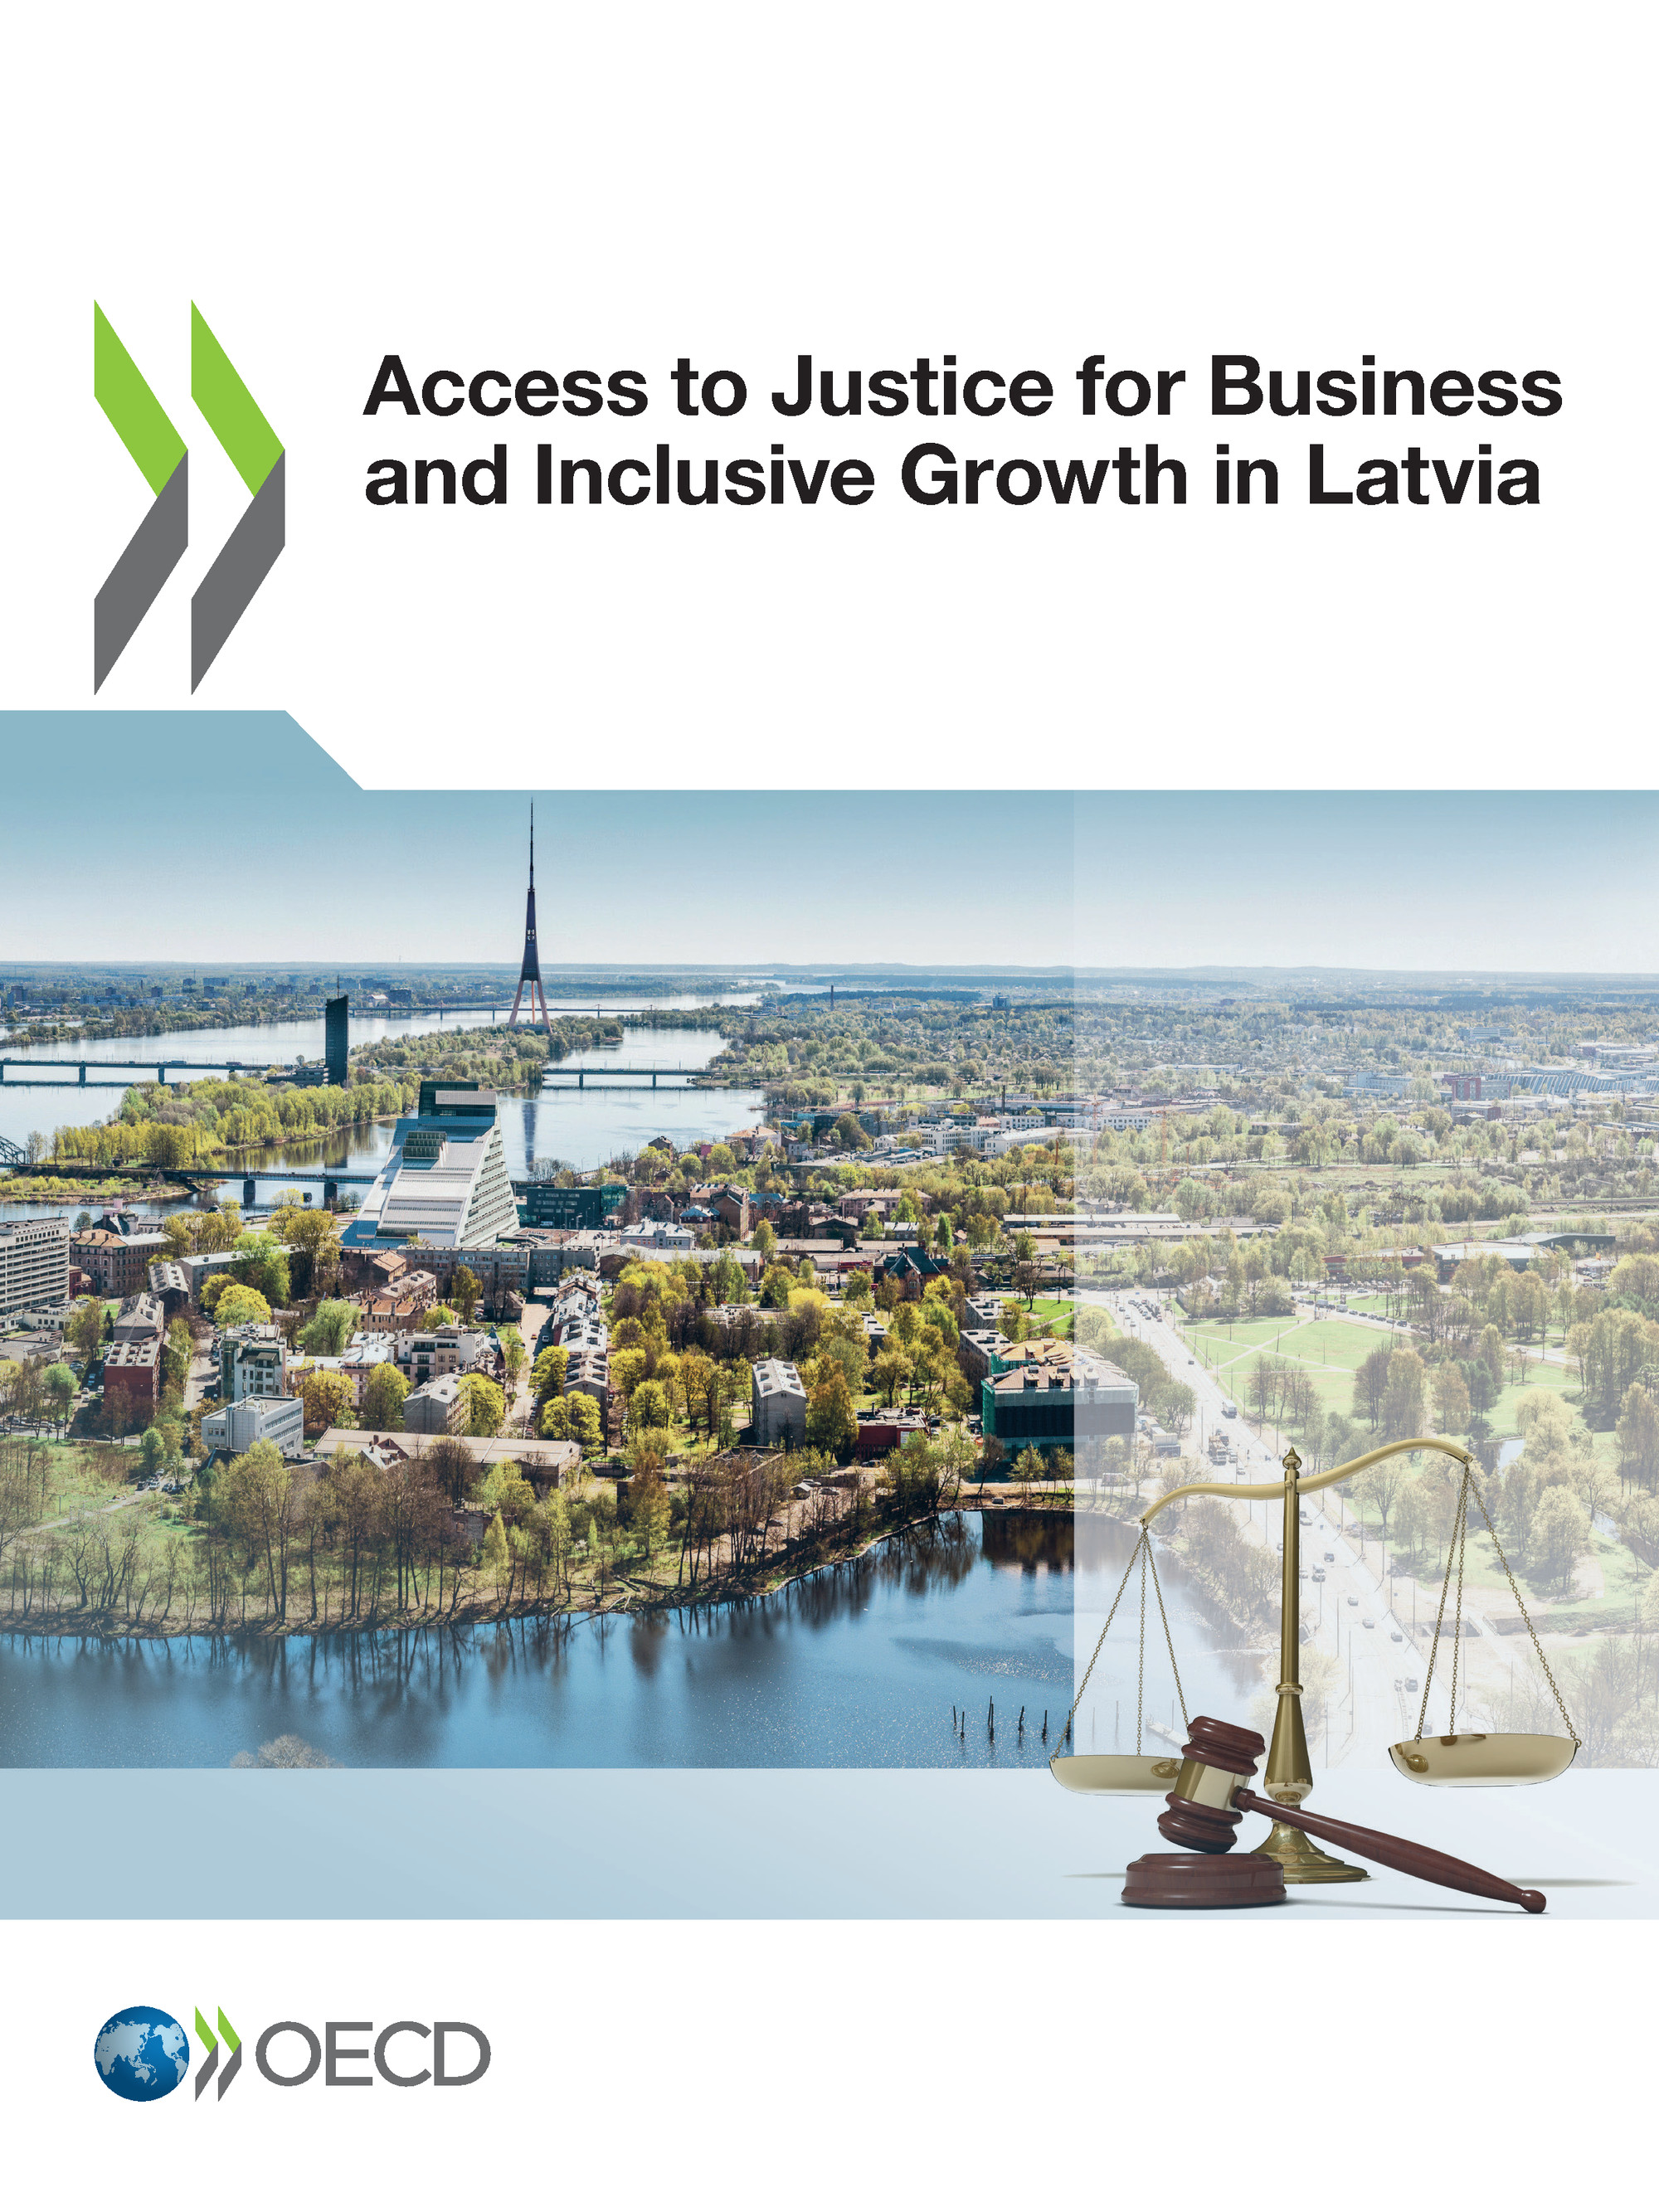 Access to Justice for Business and Inclusive Growth in Latvia -  Collectif - OCDE / OECD